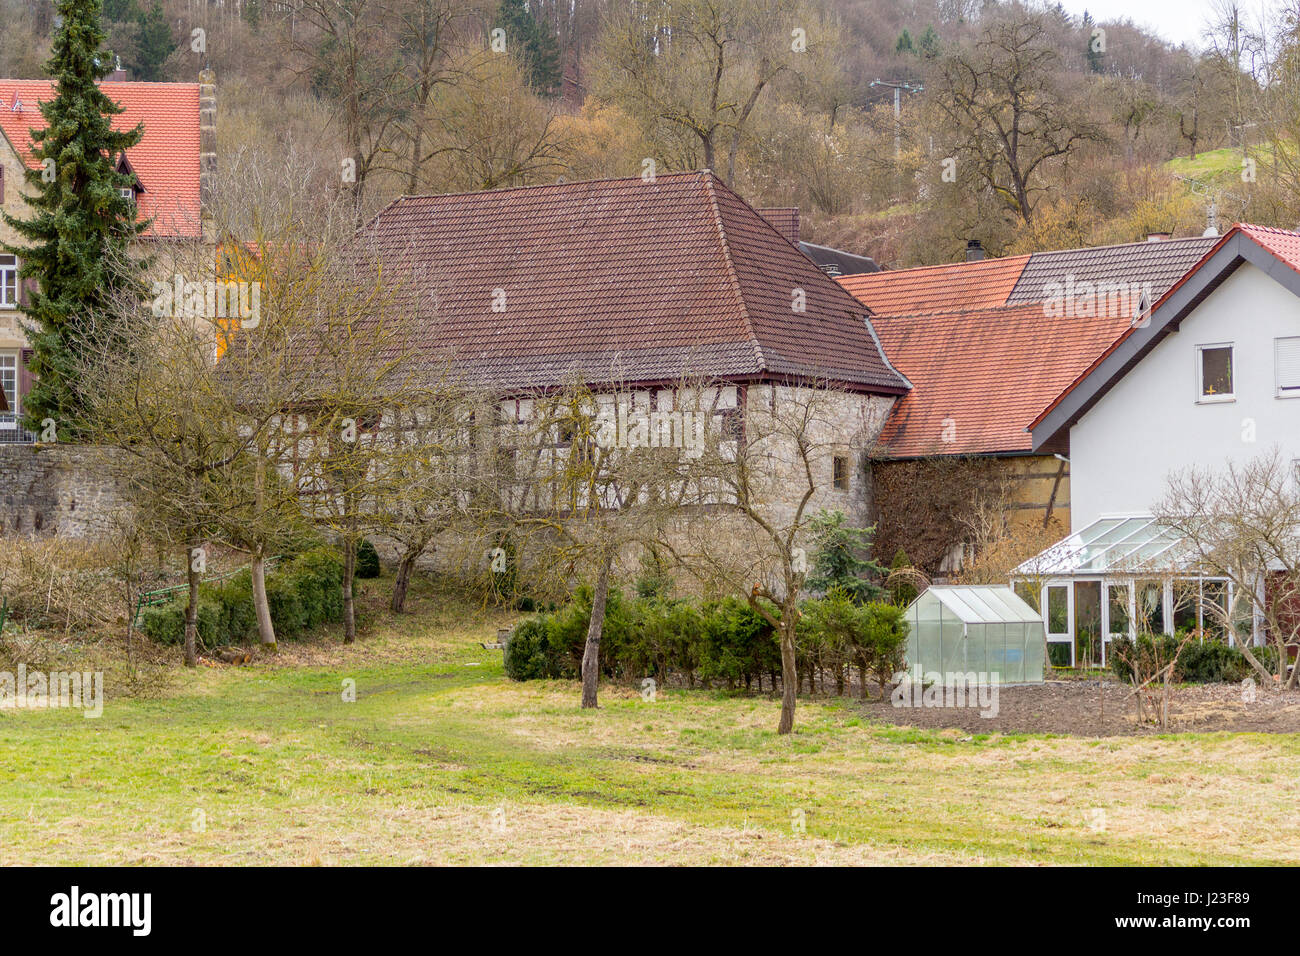 idyllic agricultural scenery at Unterregenbach, a village in Hohenlohe in Southern Germany Stock Photo